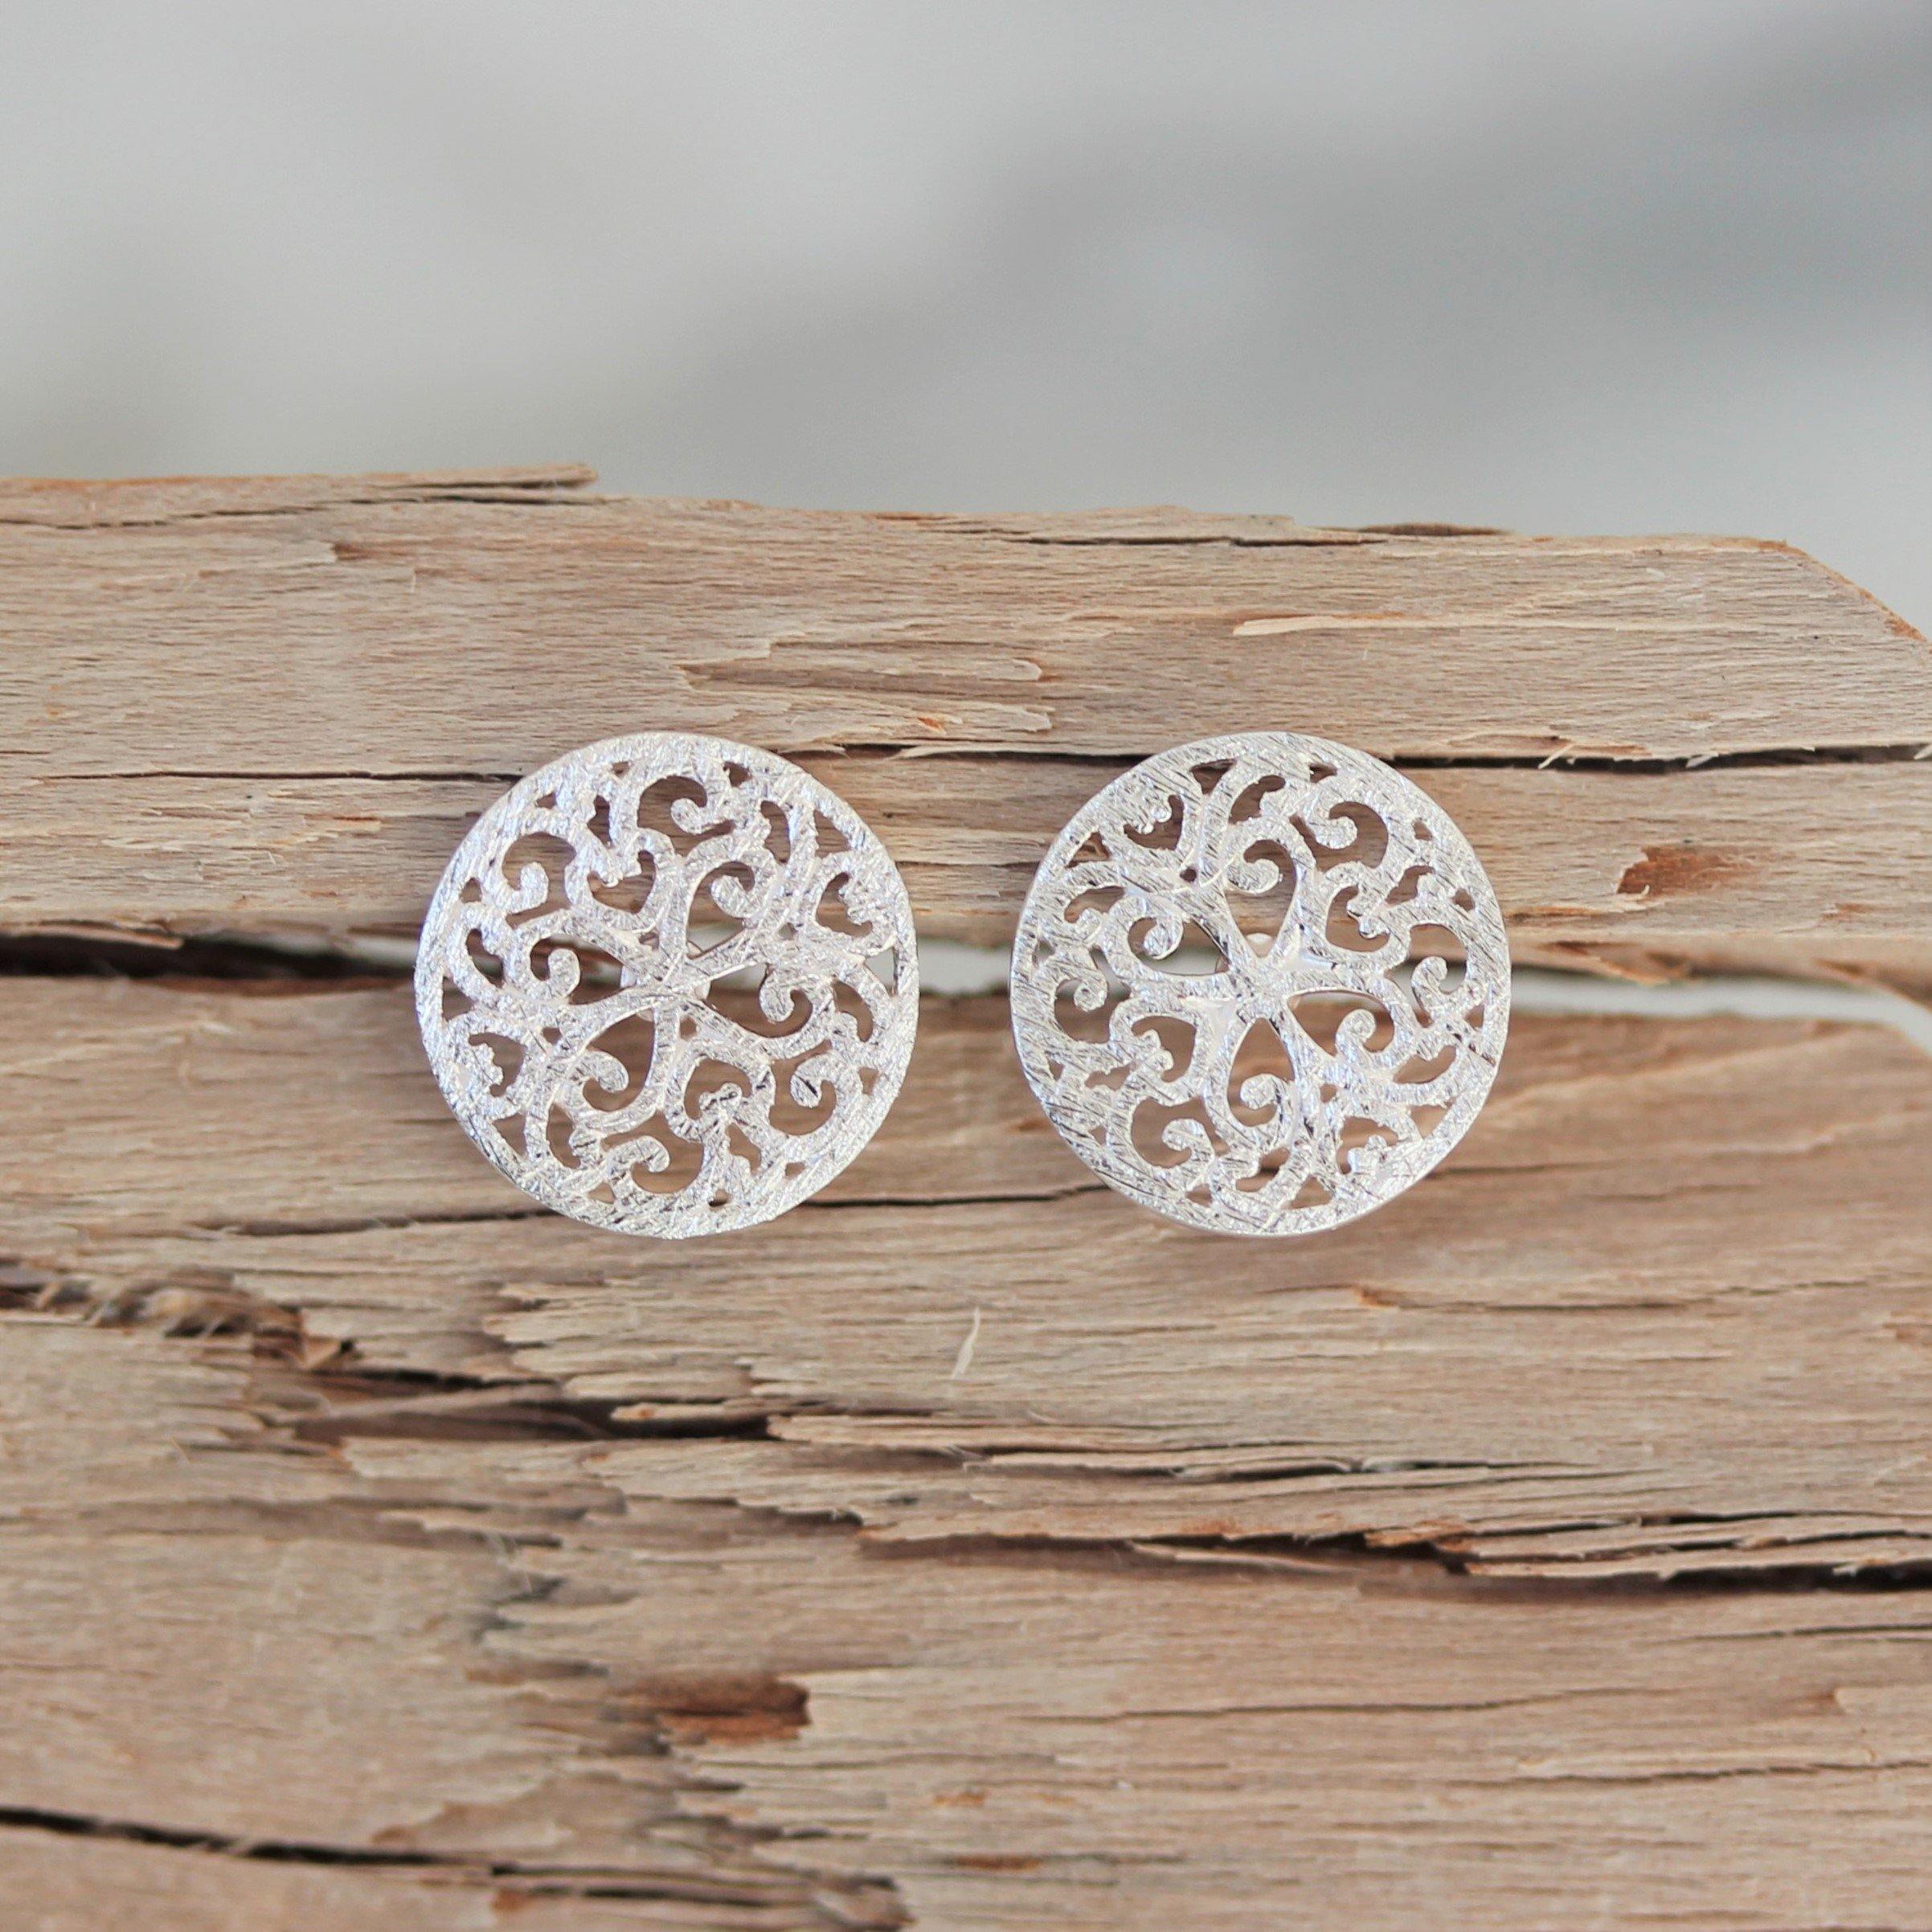 Sterling Silver 10mm Round Filigree Matte Finish Stud Earrings - STERLING SILVER DESIGNS